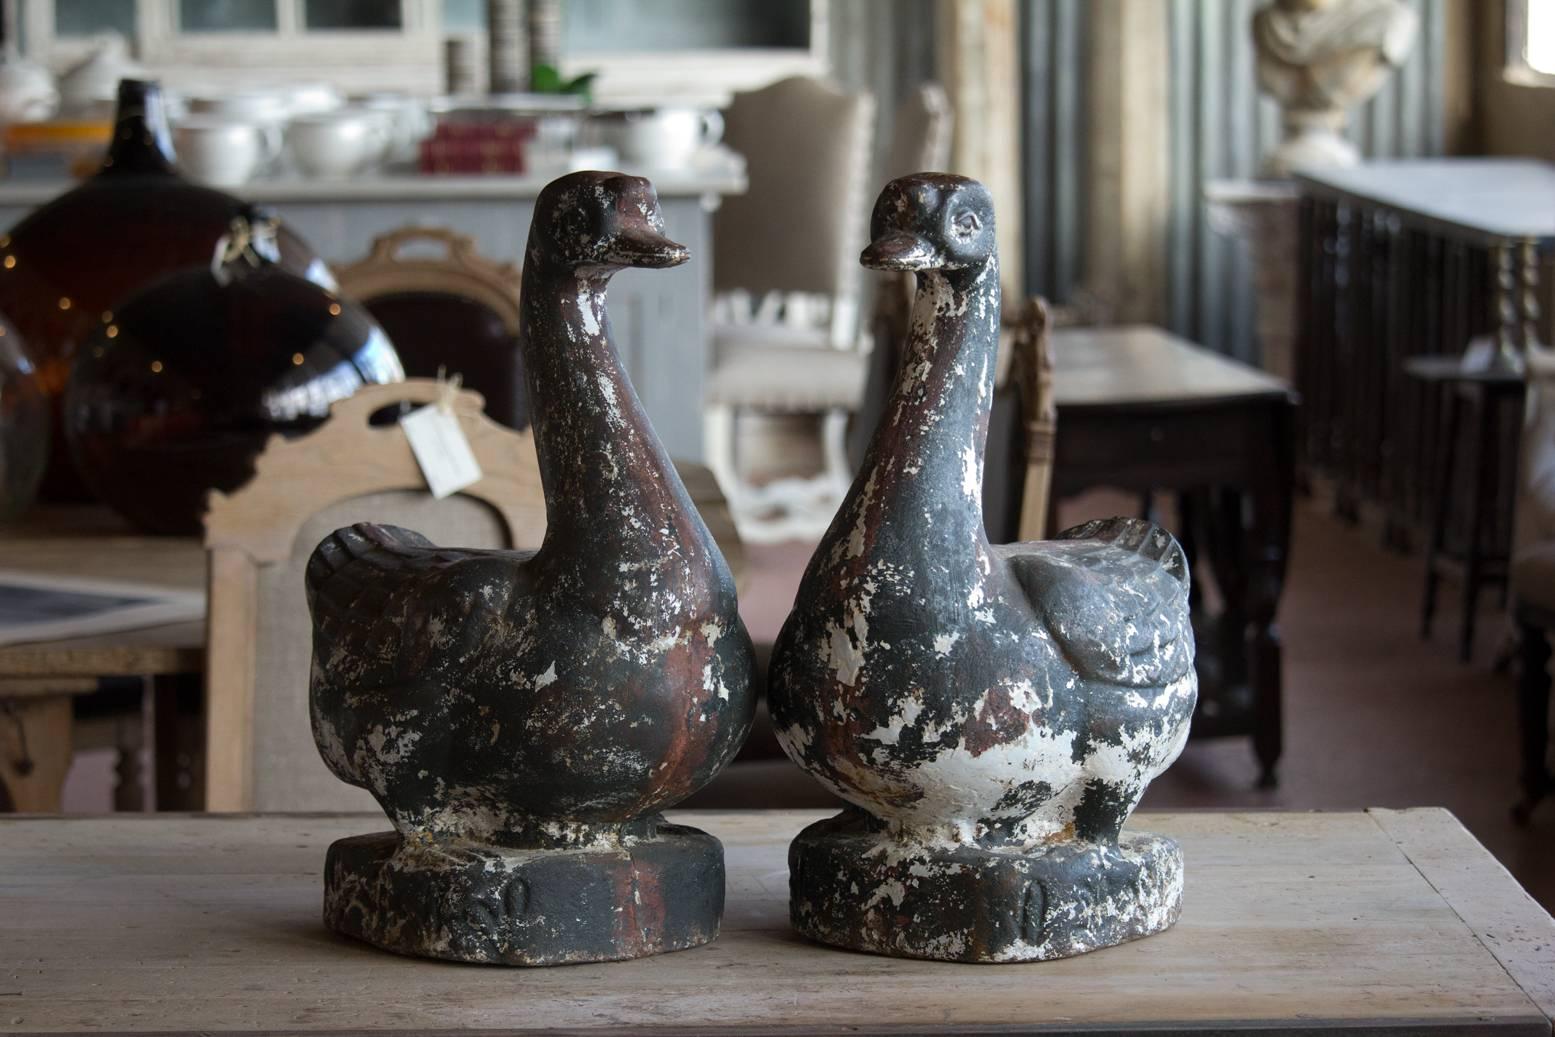 Pair of substantial vintage English cast iron ducks with original distressed paint. Tons of character.